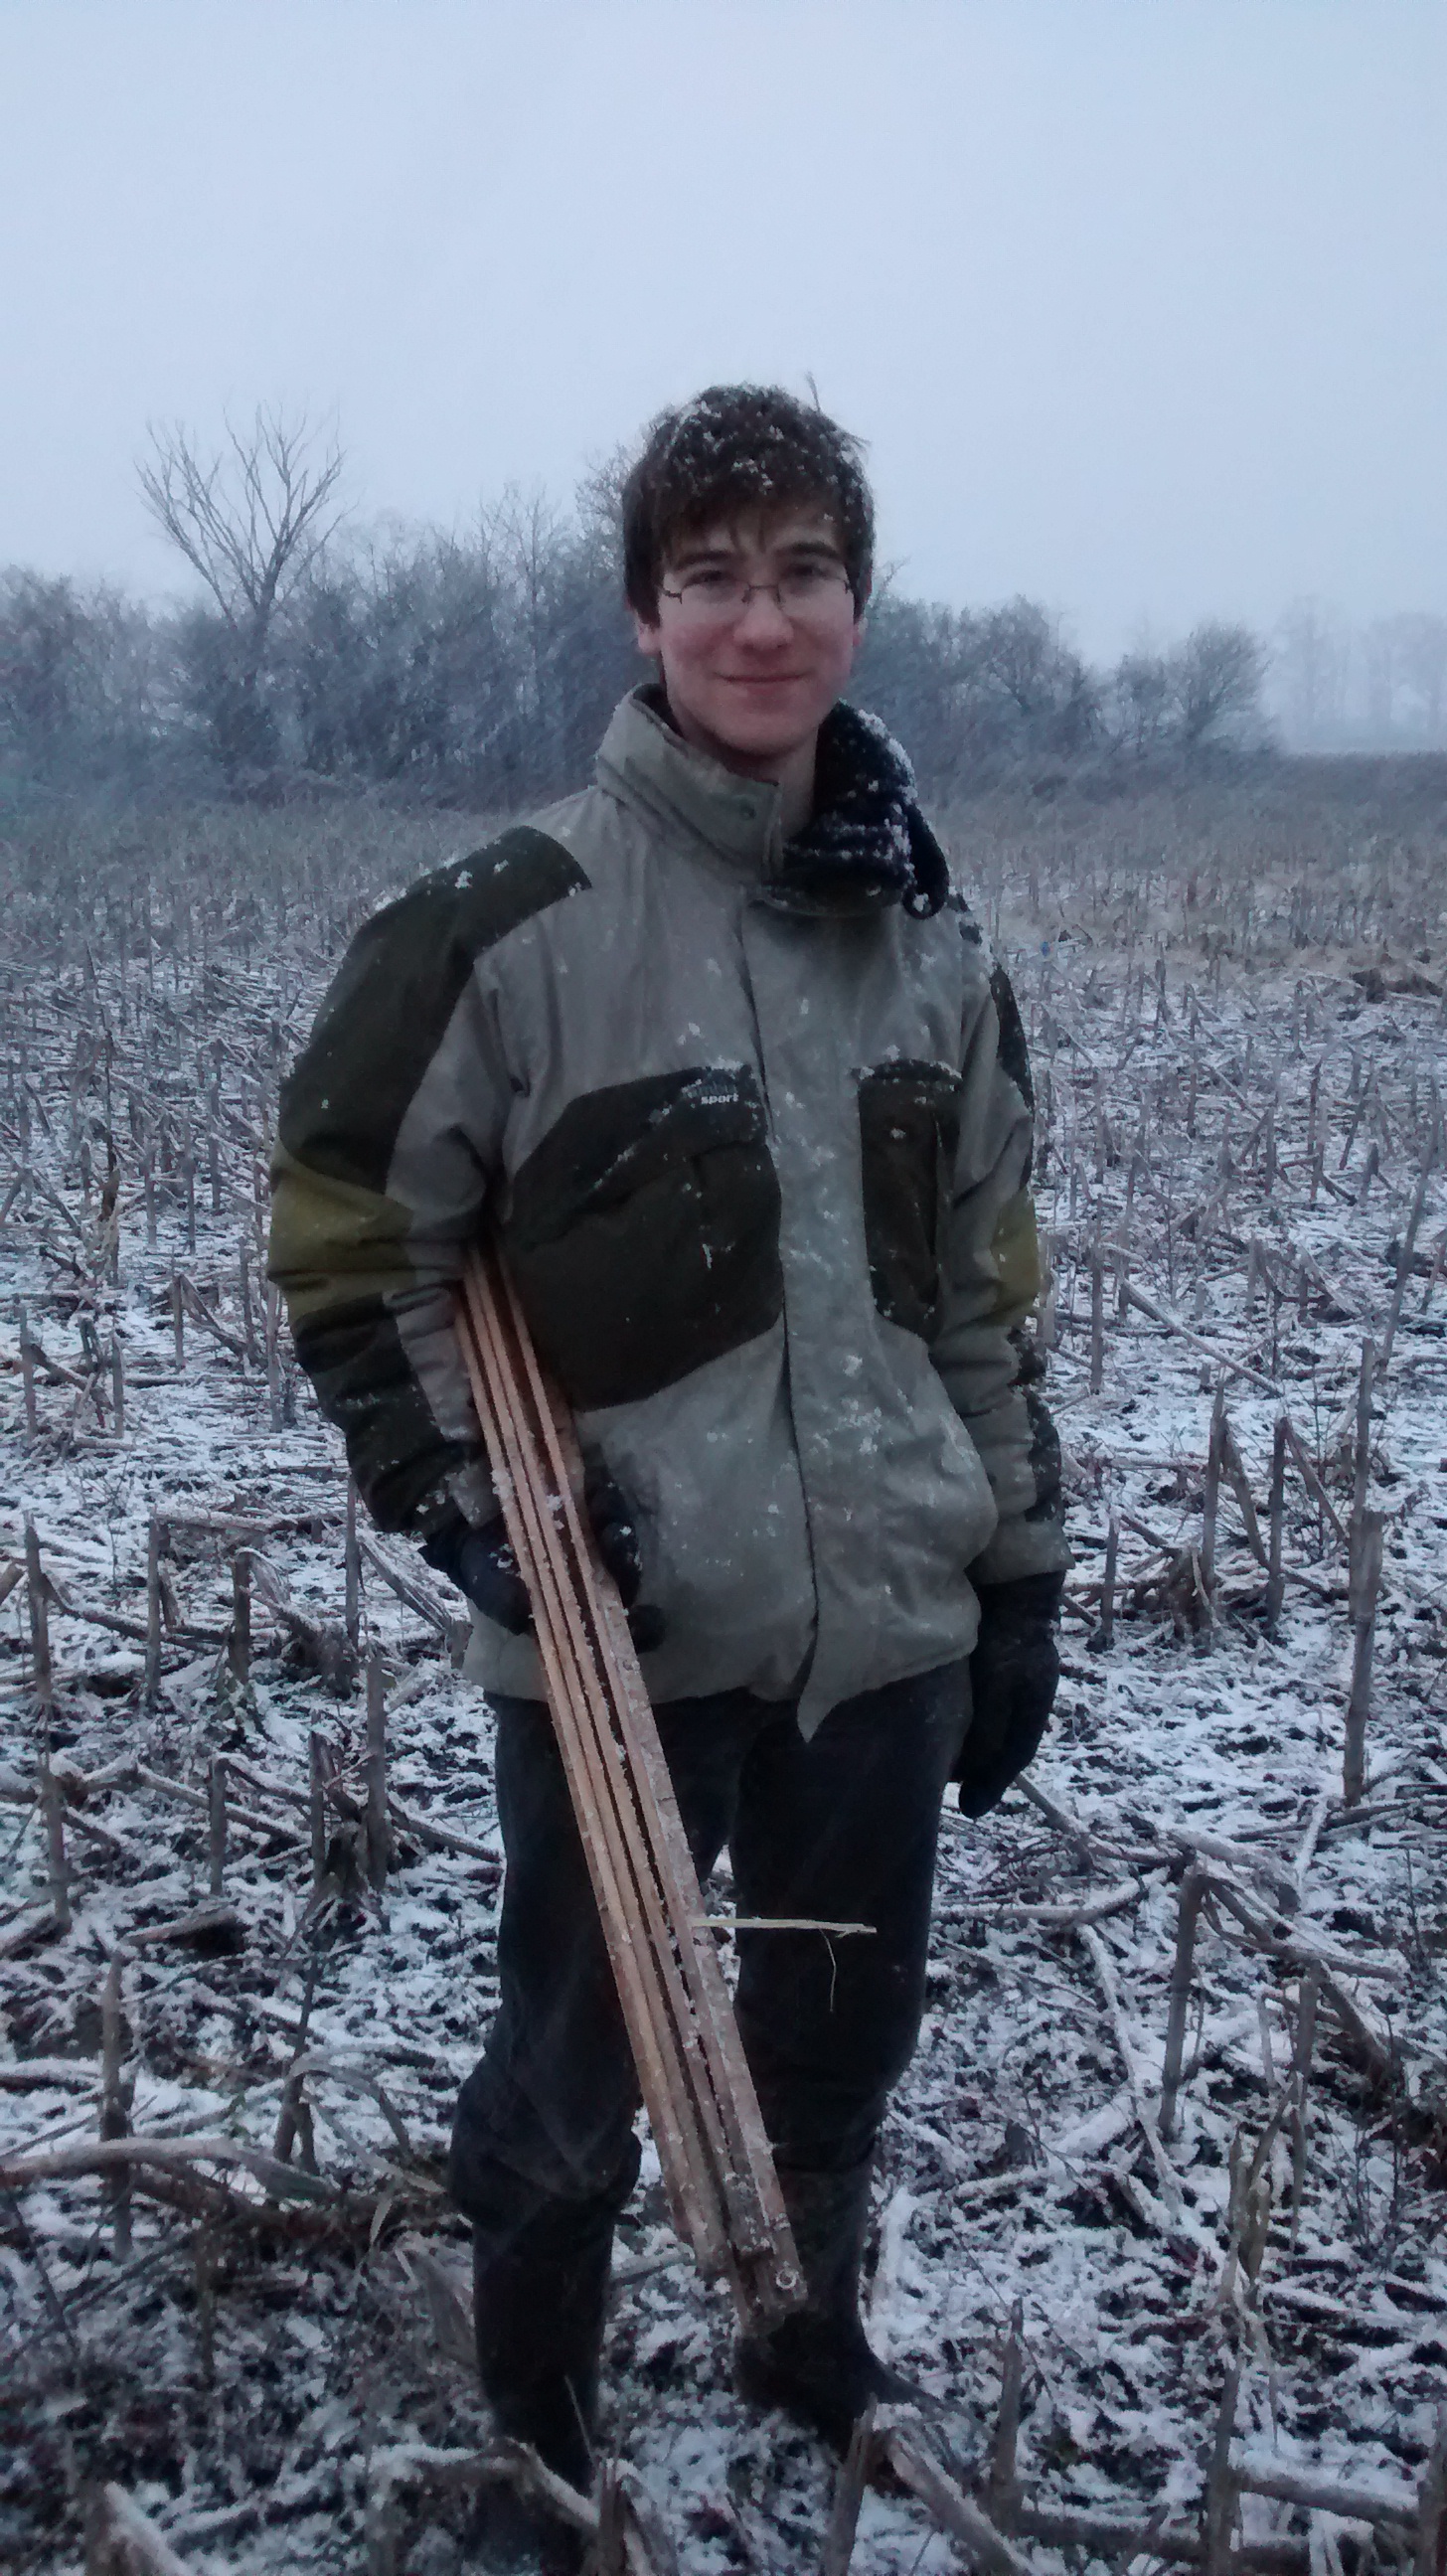 Michael McTavish sets up mulch plots to assess earthworm interactions with soil amendment at Glenorchy Conservation Area, Ontario, Canada, in November 2014. Credit: Heather Cray.